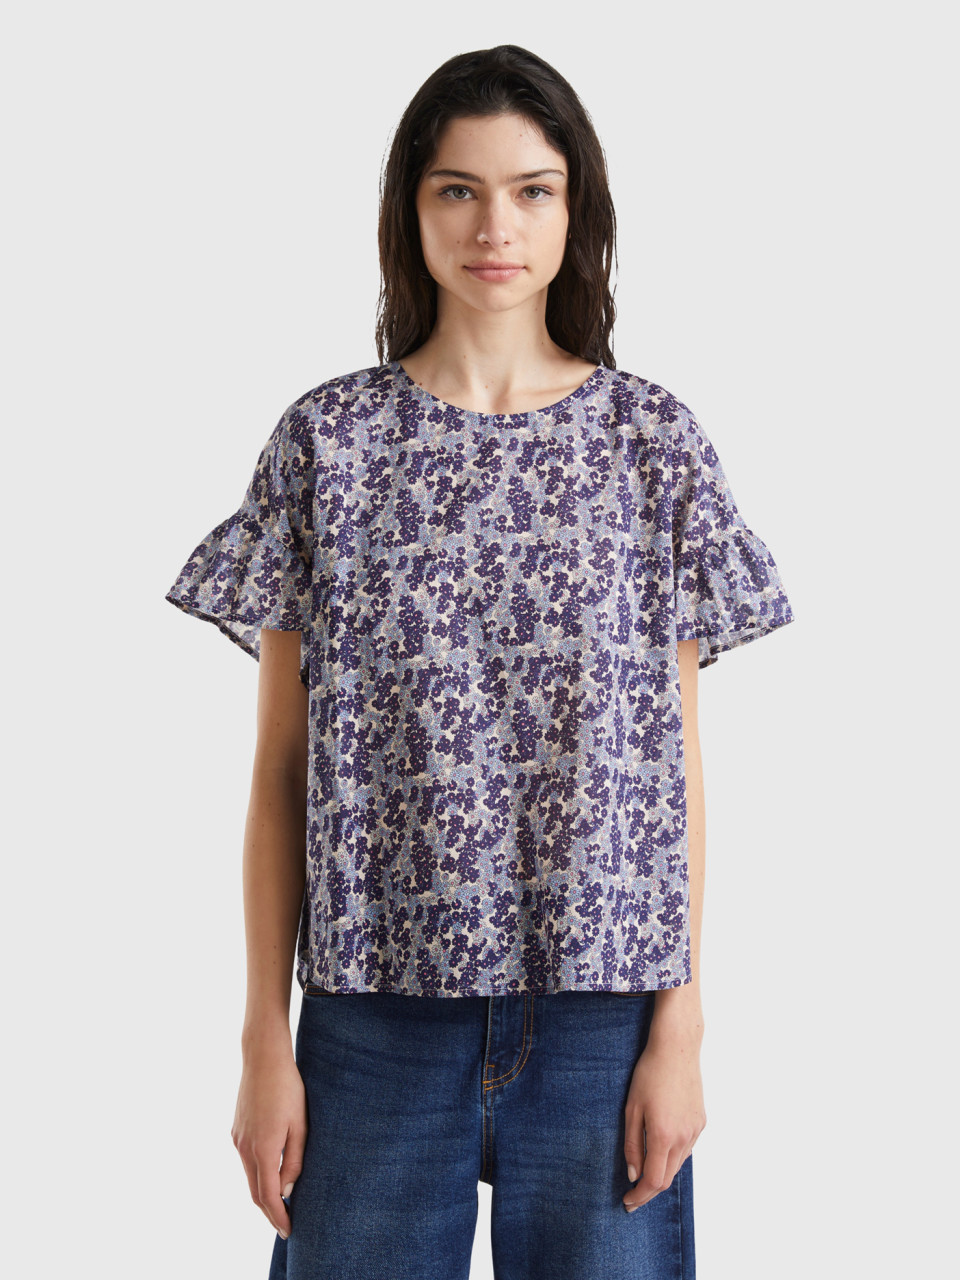 Benetton, Patterned Blouse In Light Cotton, Lilac, Women